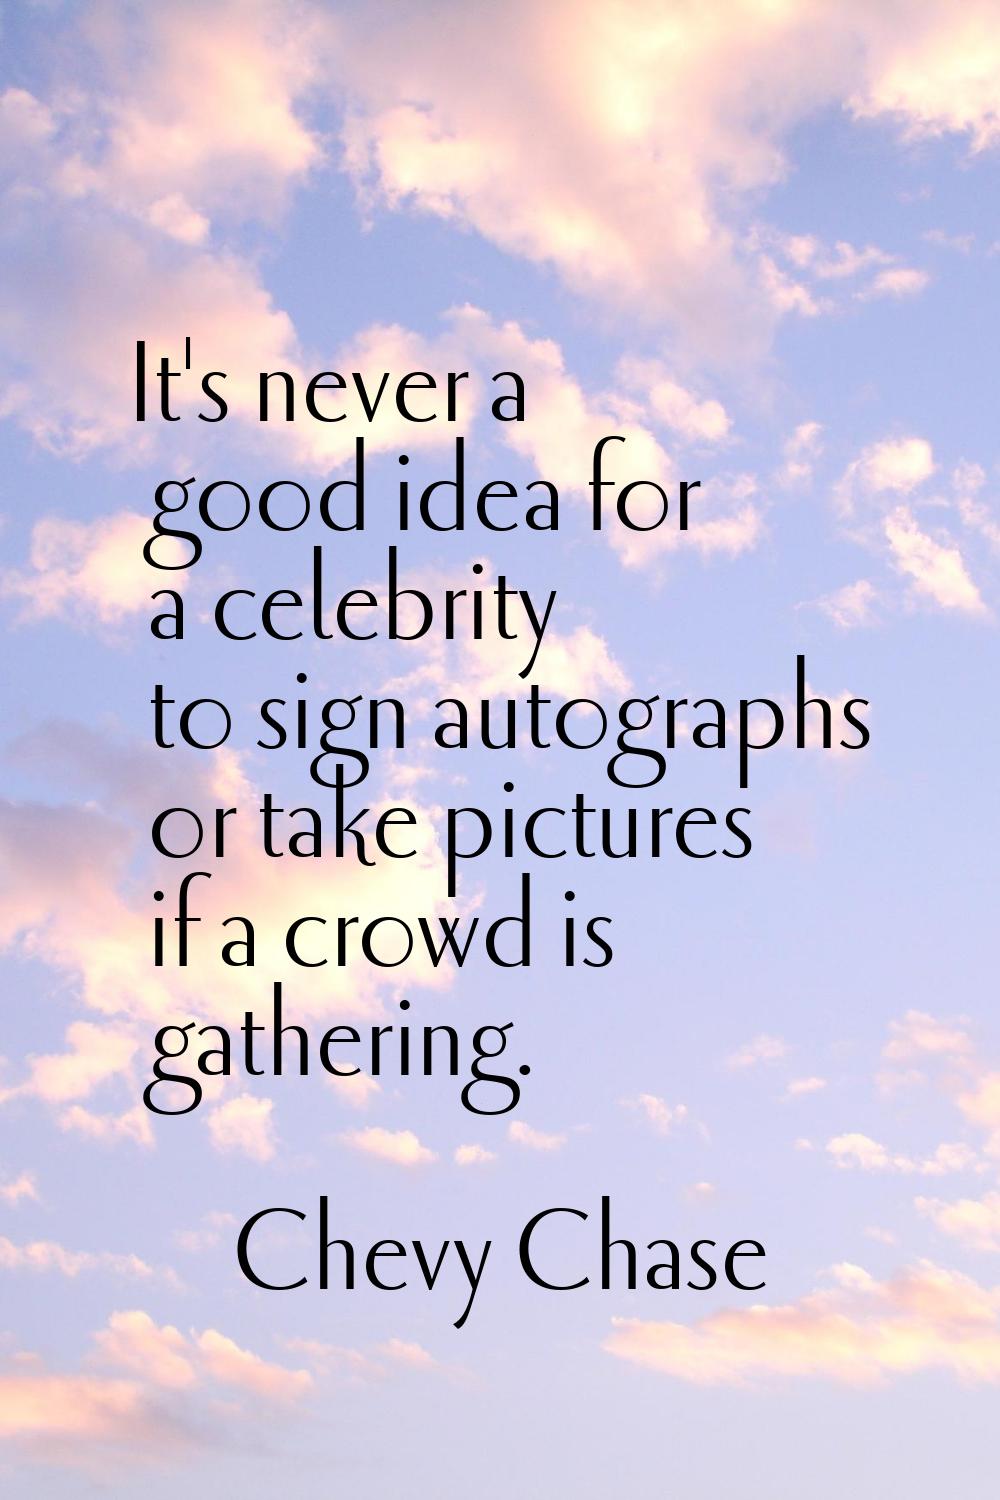 It's never a good idea for a celebrity to sign autographs or take pictures if a crowd is gathering.